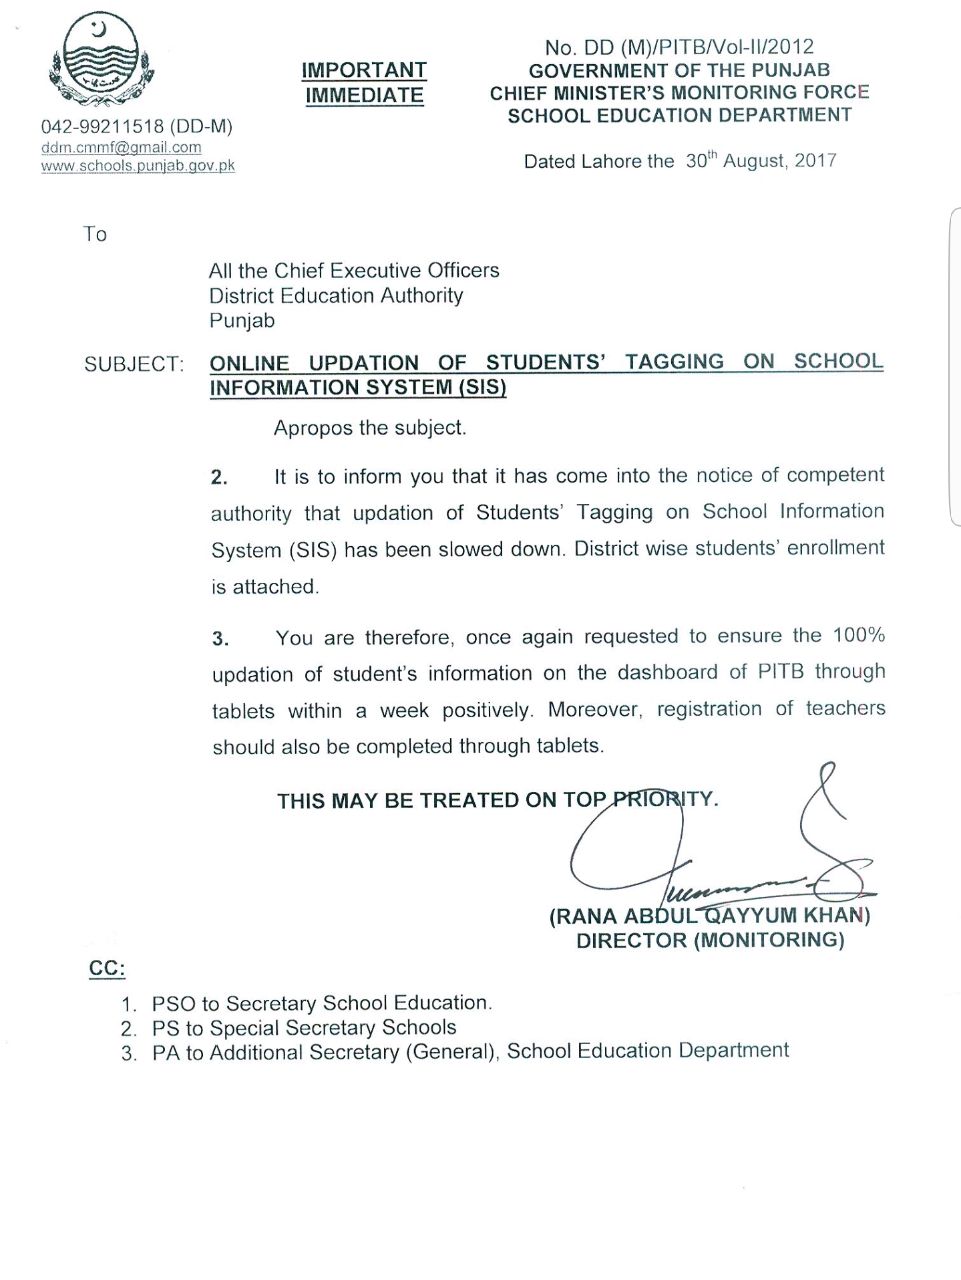 ONLINE UPDATION OF STUDENTS TAGGING ON SCHOOL INFORMATION SYSTEM